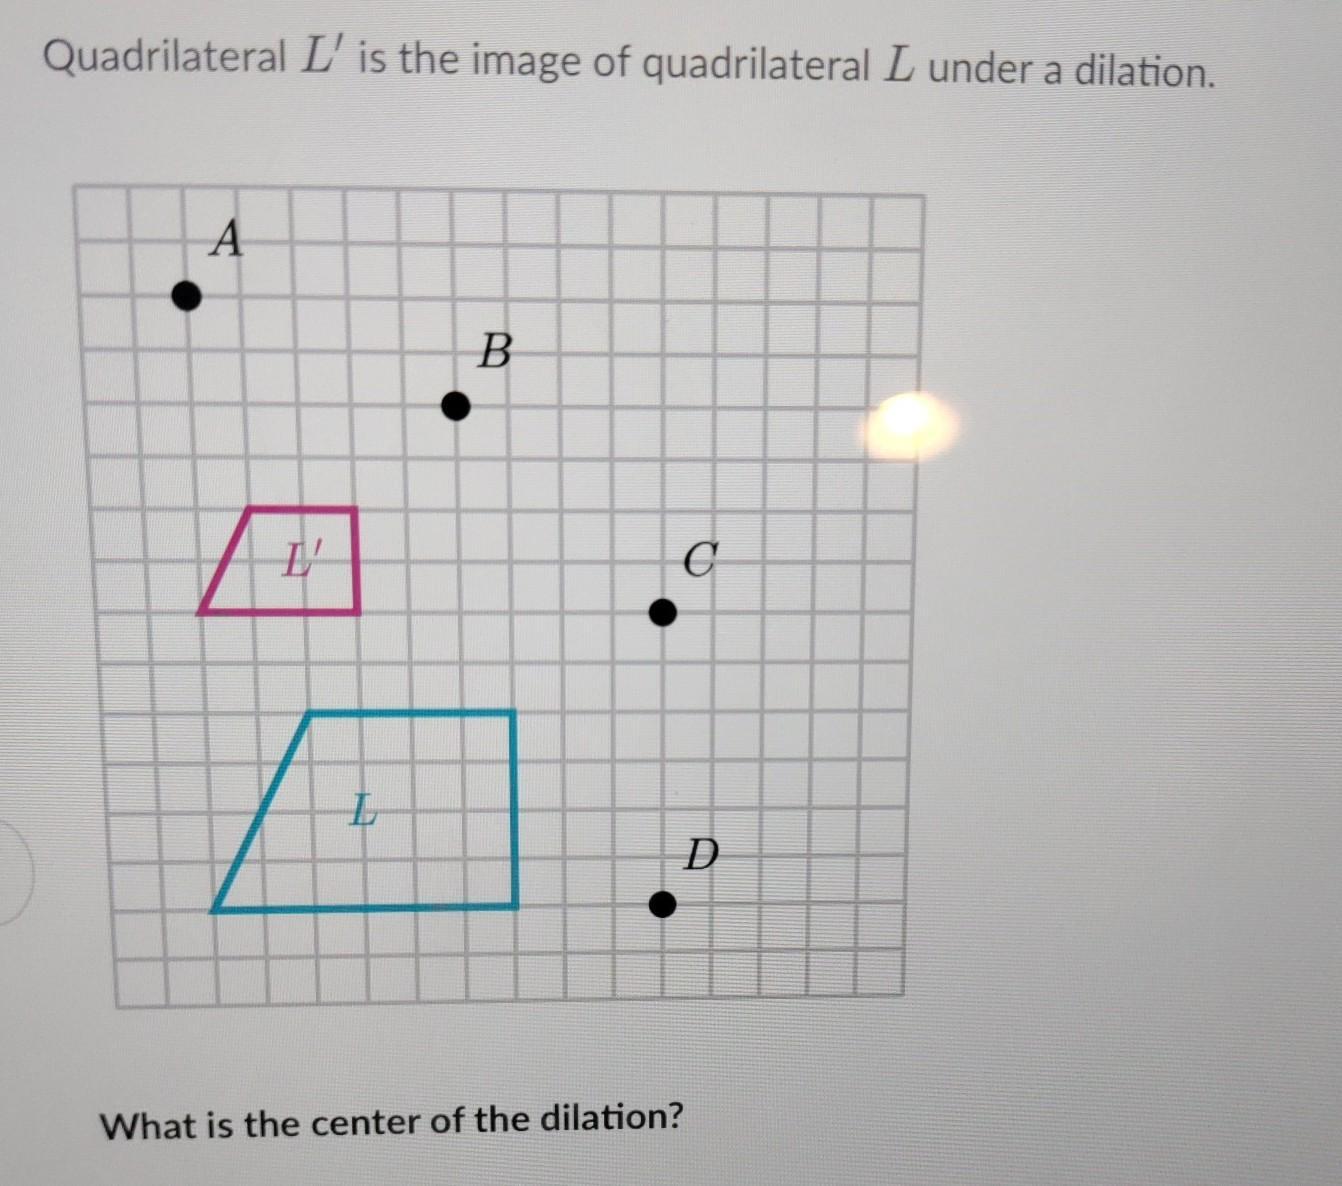 &lt; Quadrilateral L' Is The Image Of Quadrilateral L Under A Dilation. What Is The Center Of The Dilation?